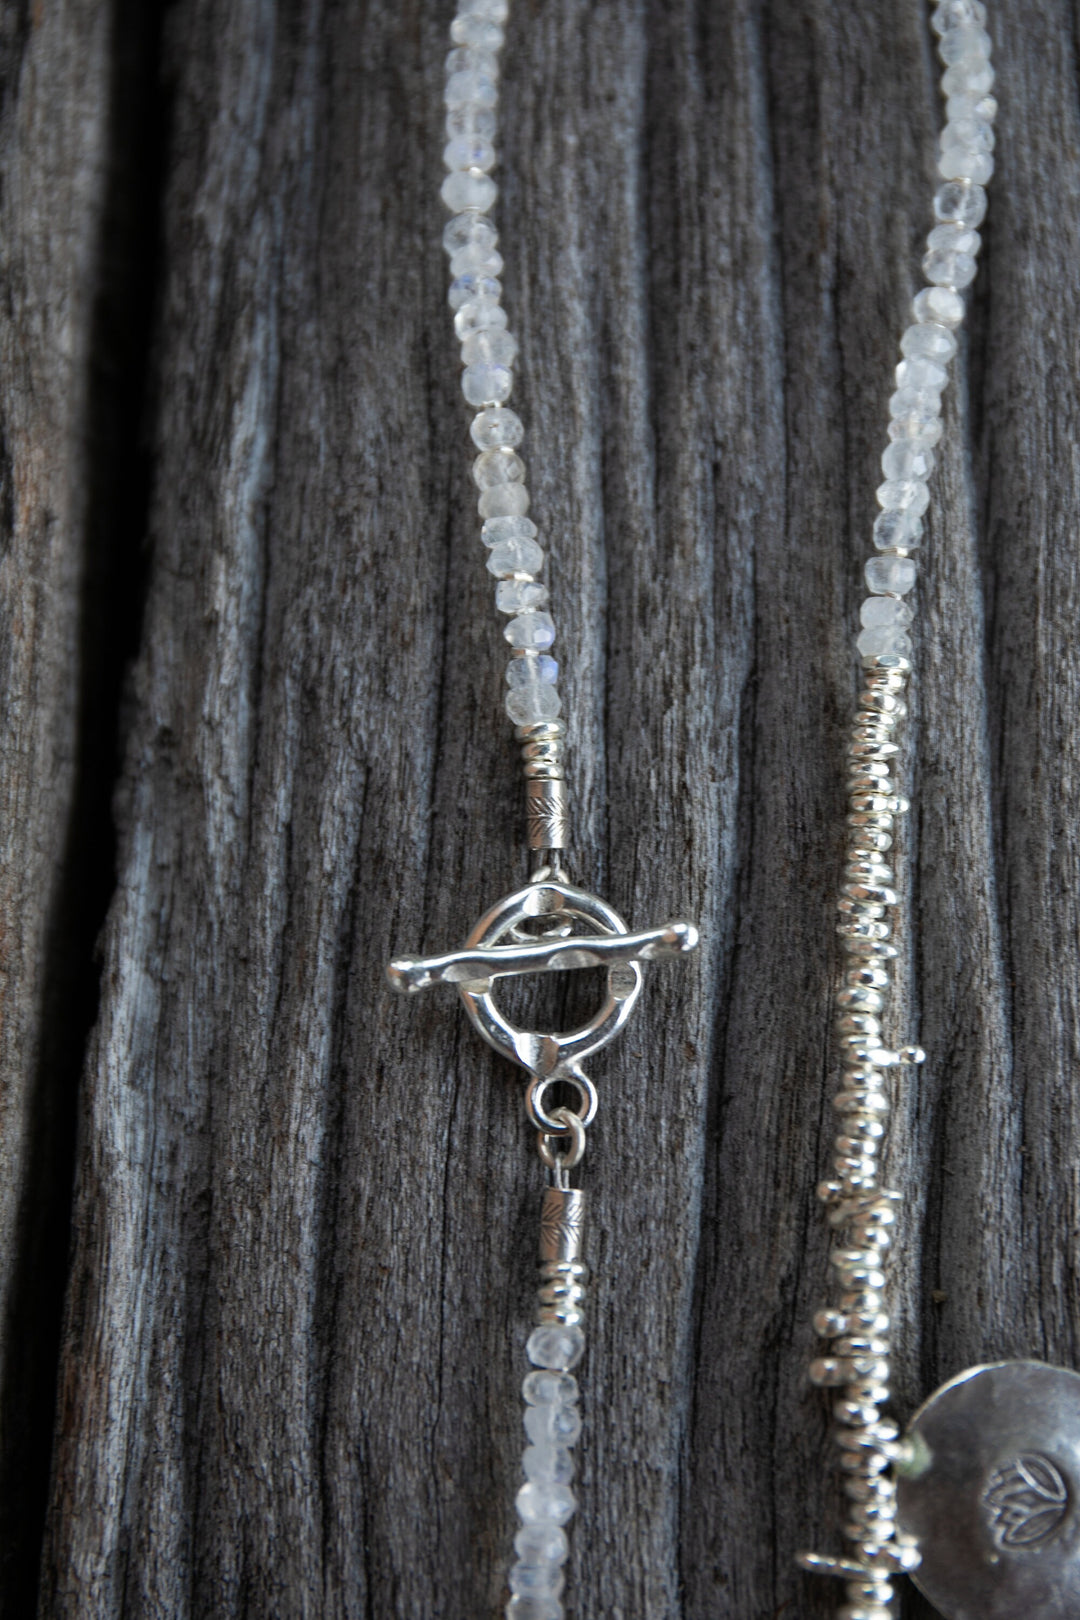 Rainbow Moonstone Necklace with Lotus Pendant and Thai Hill Tribe Silver Beads